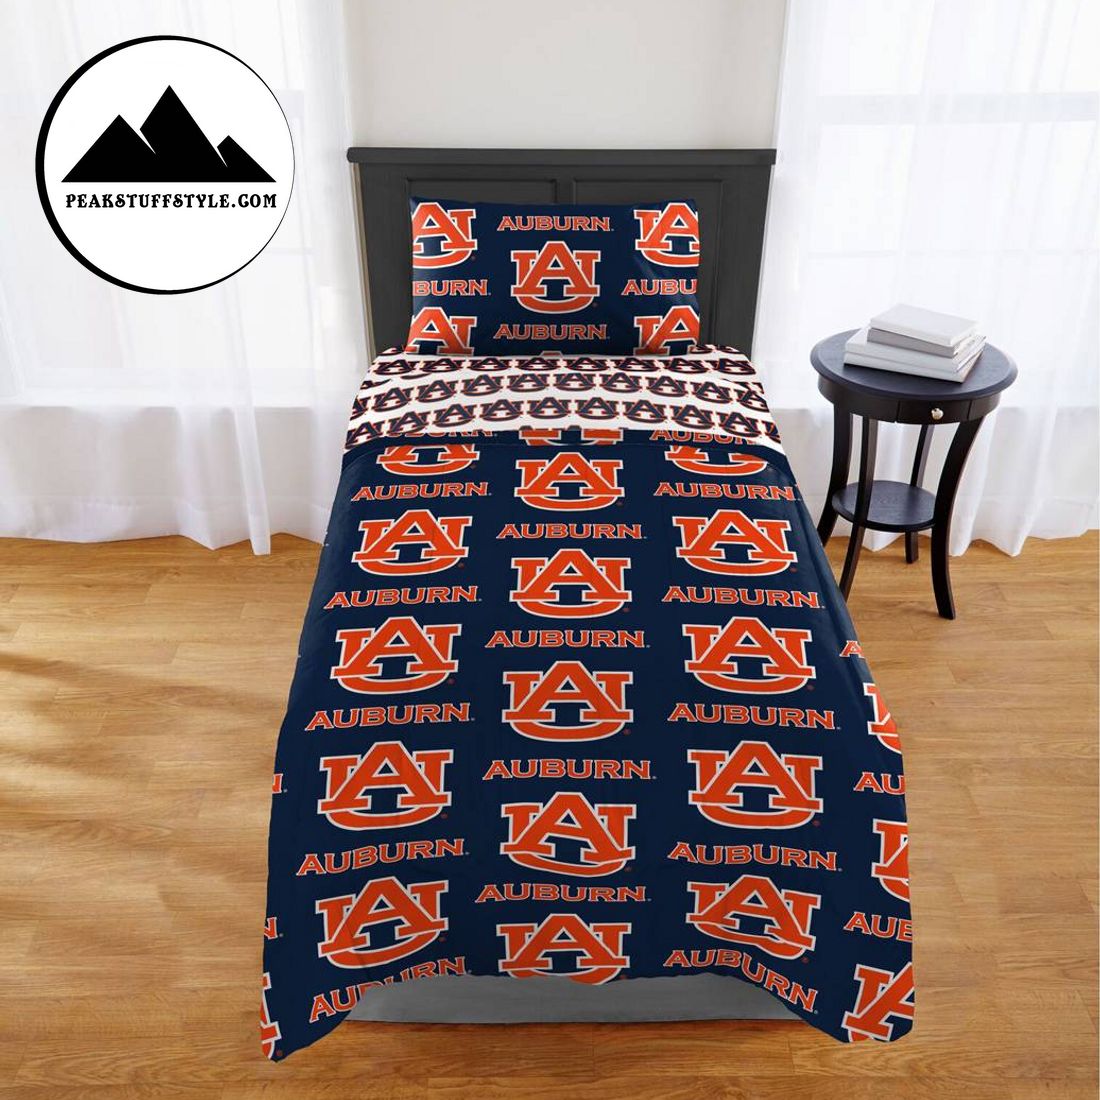 AUBURN TIGERS NCAA ROTARY TWIN BED IN A BAG SET BEDDING SET